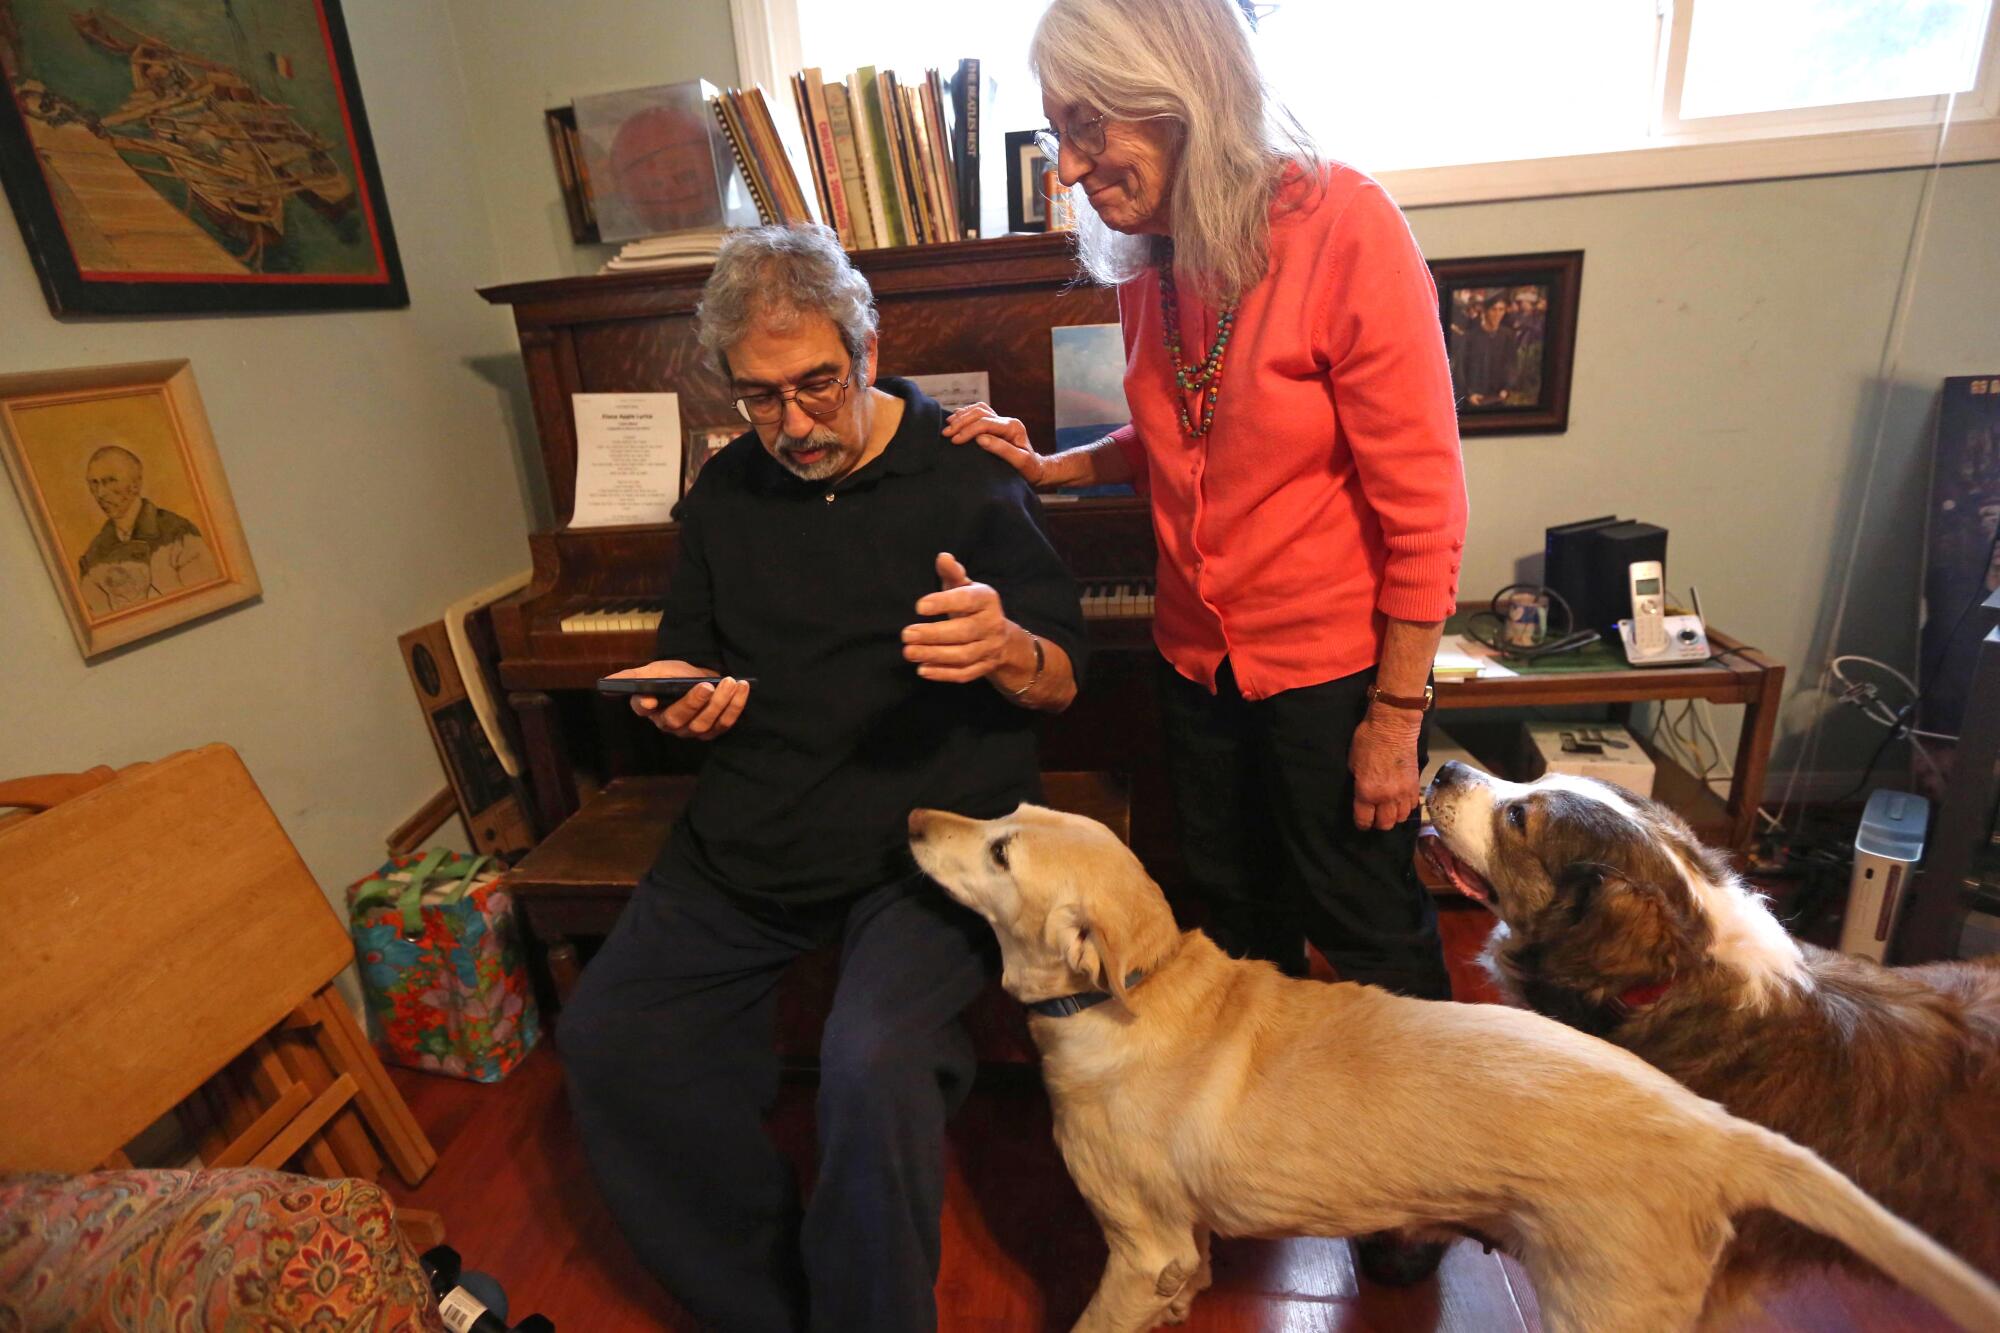 A man and a woman next to two dogs